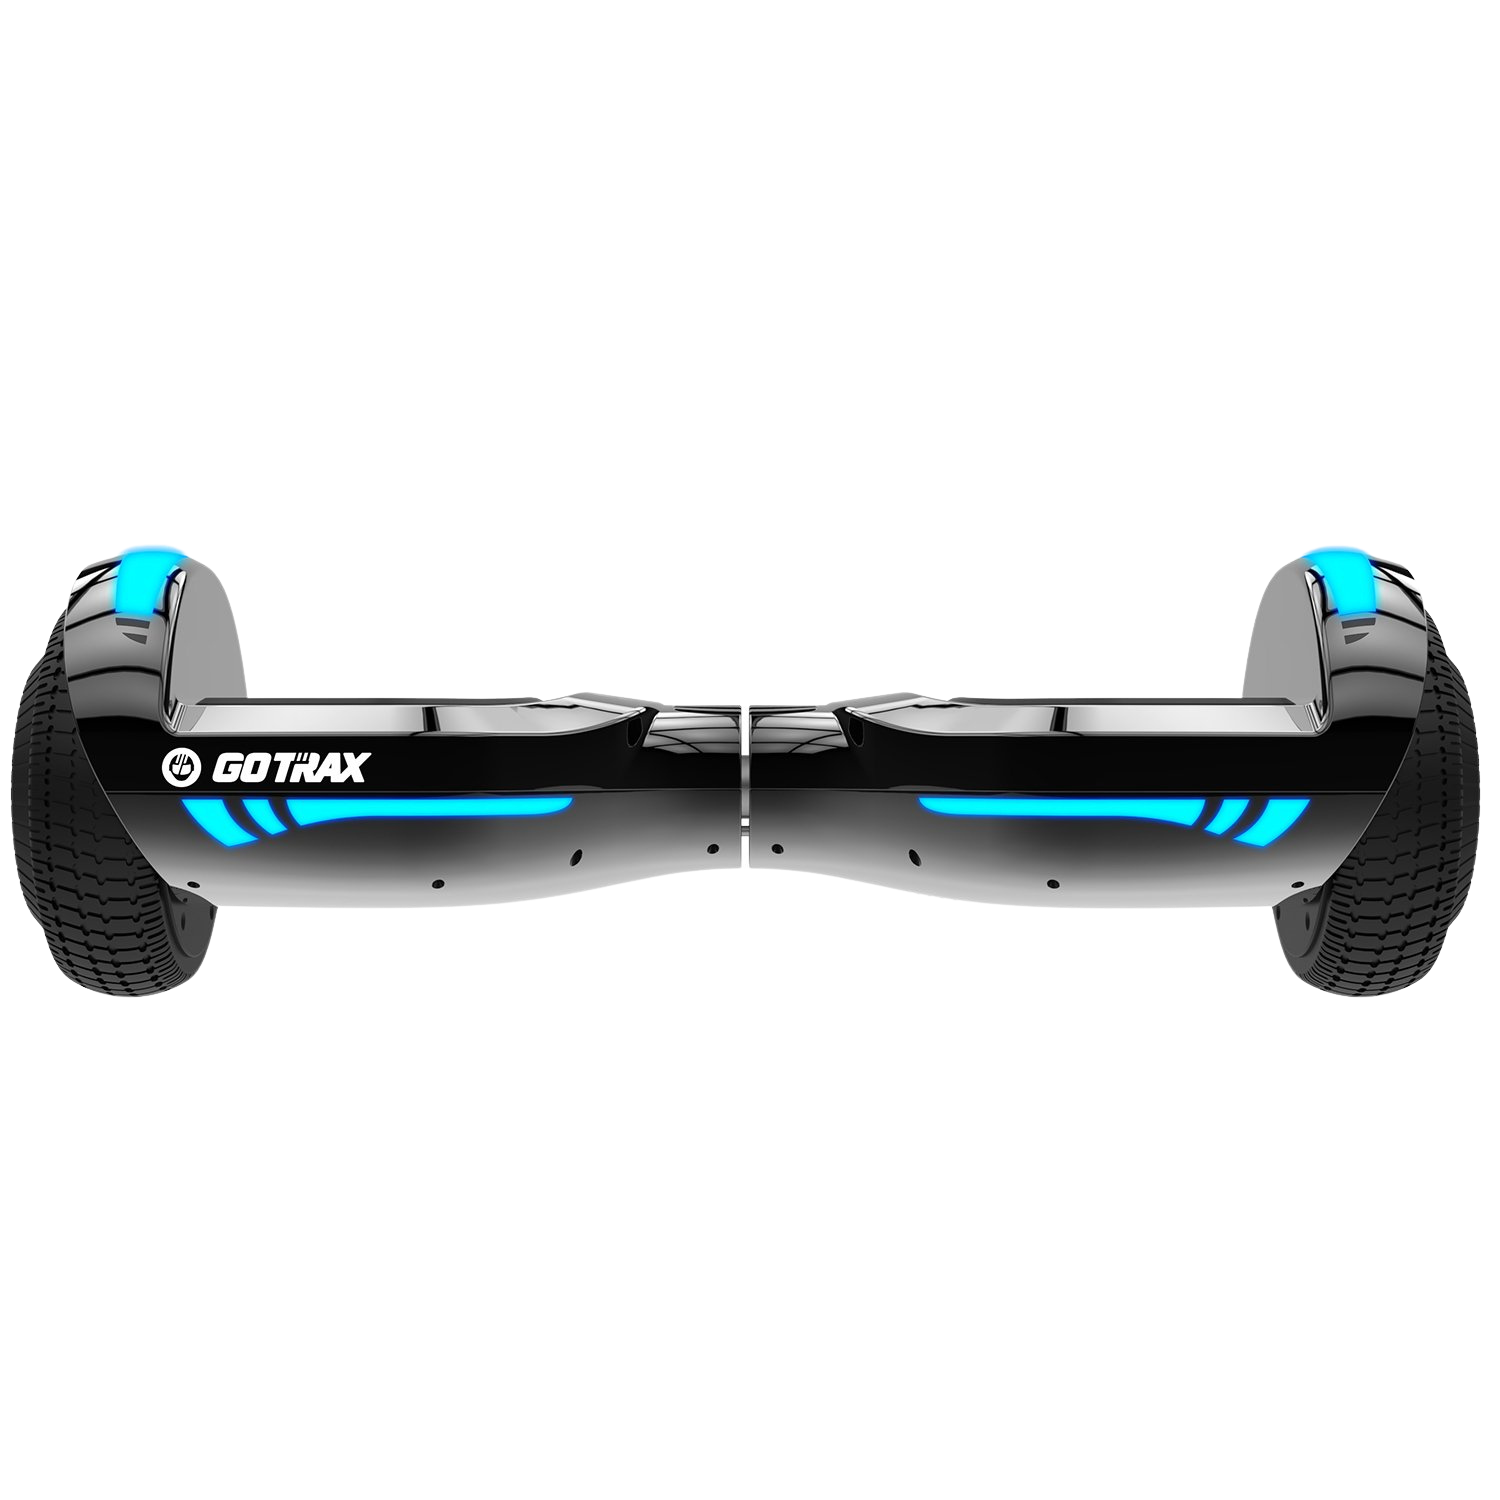 Gotrax Glide Chrome Bluetooth Self Balancing Hoverboard with Bright LED Lighting 6.5"-Max 5KM Range & 10KPH Max Speed